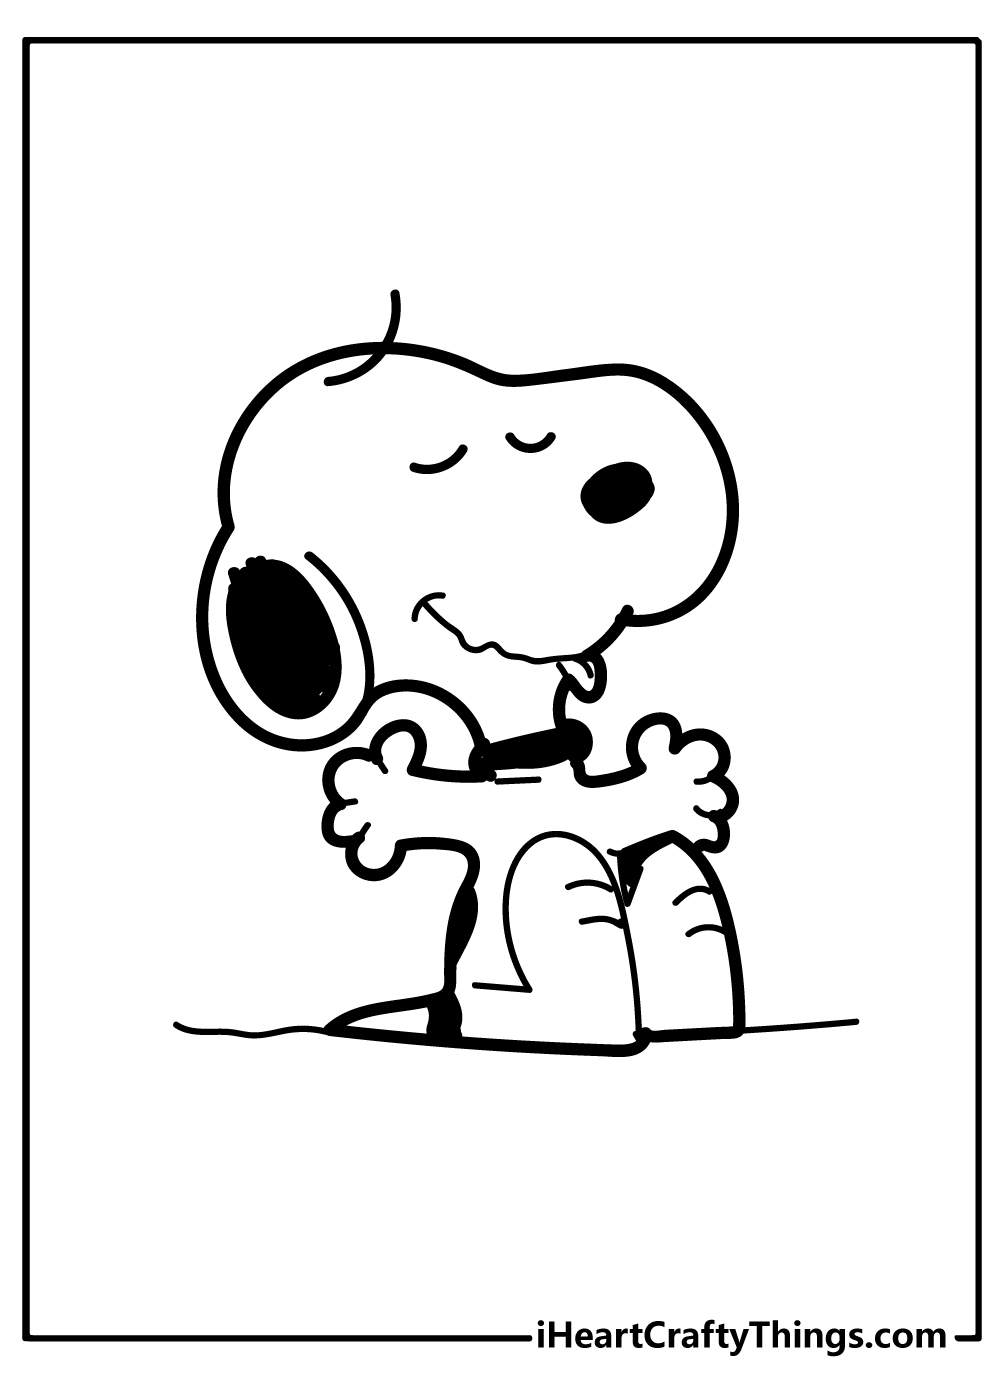 Snoopy Coloring Pages free pdf download